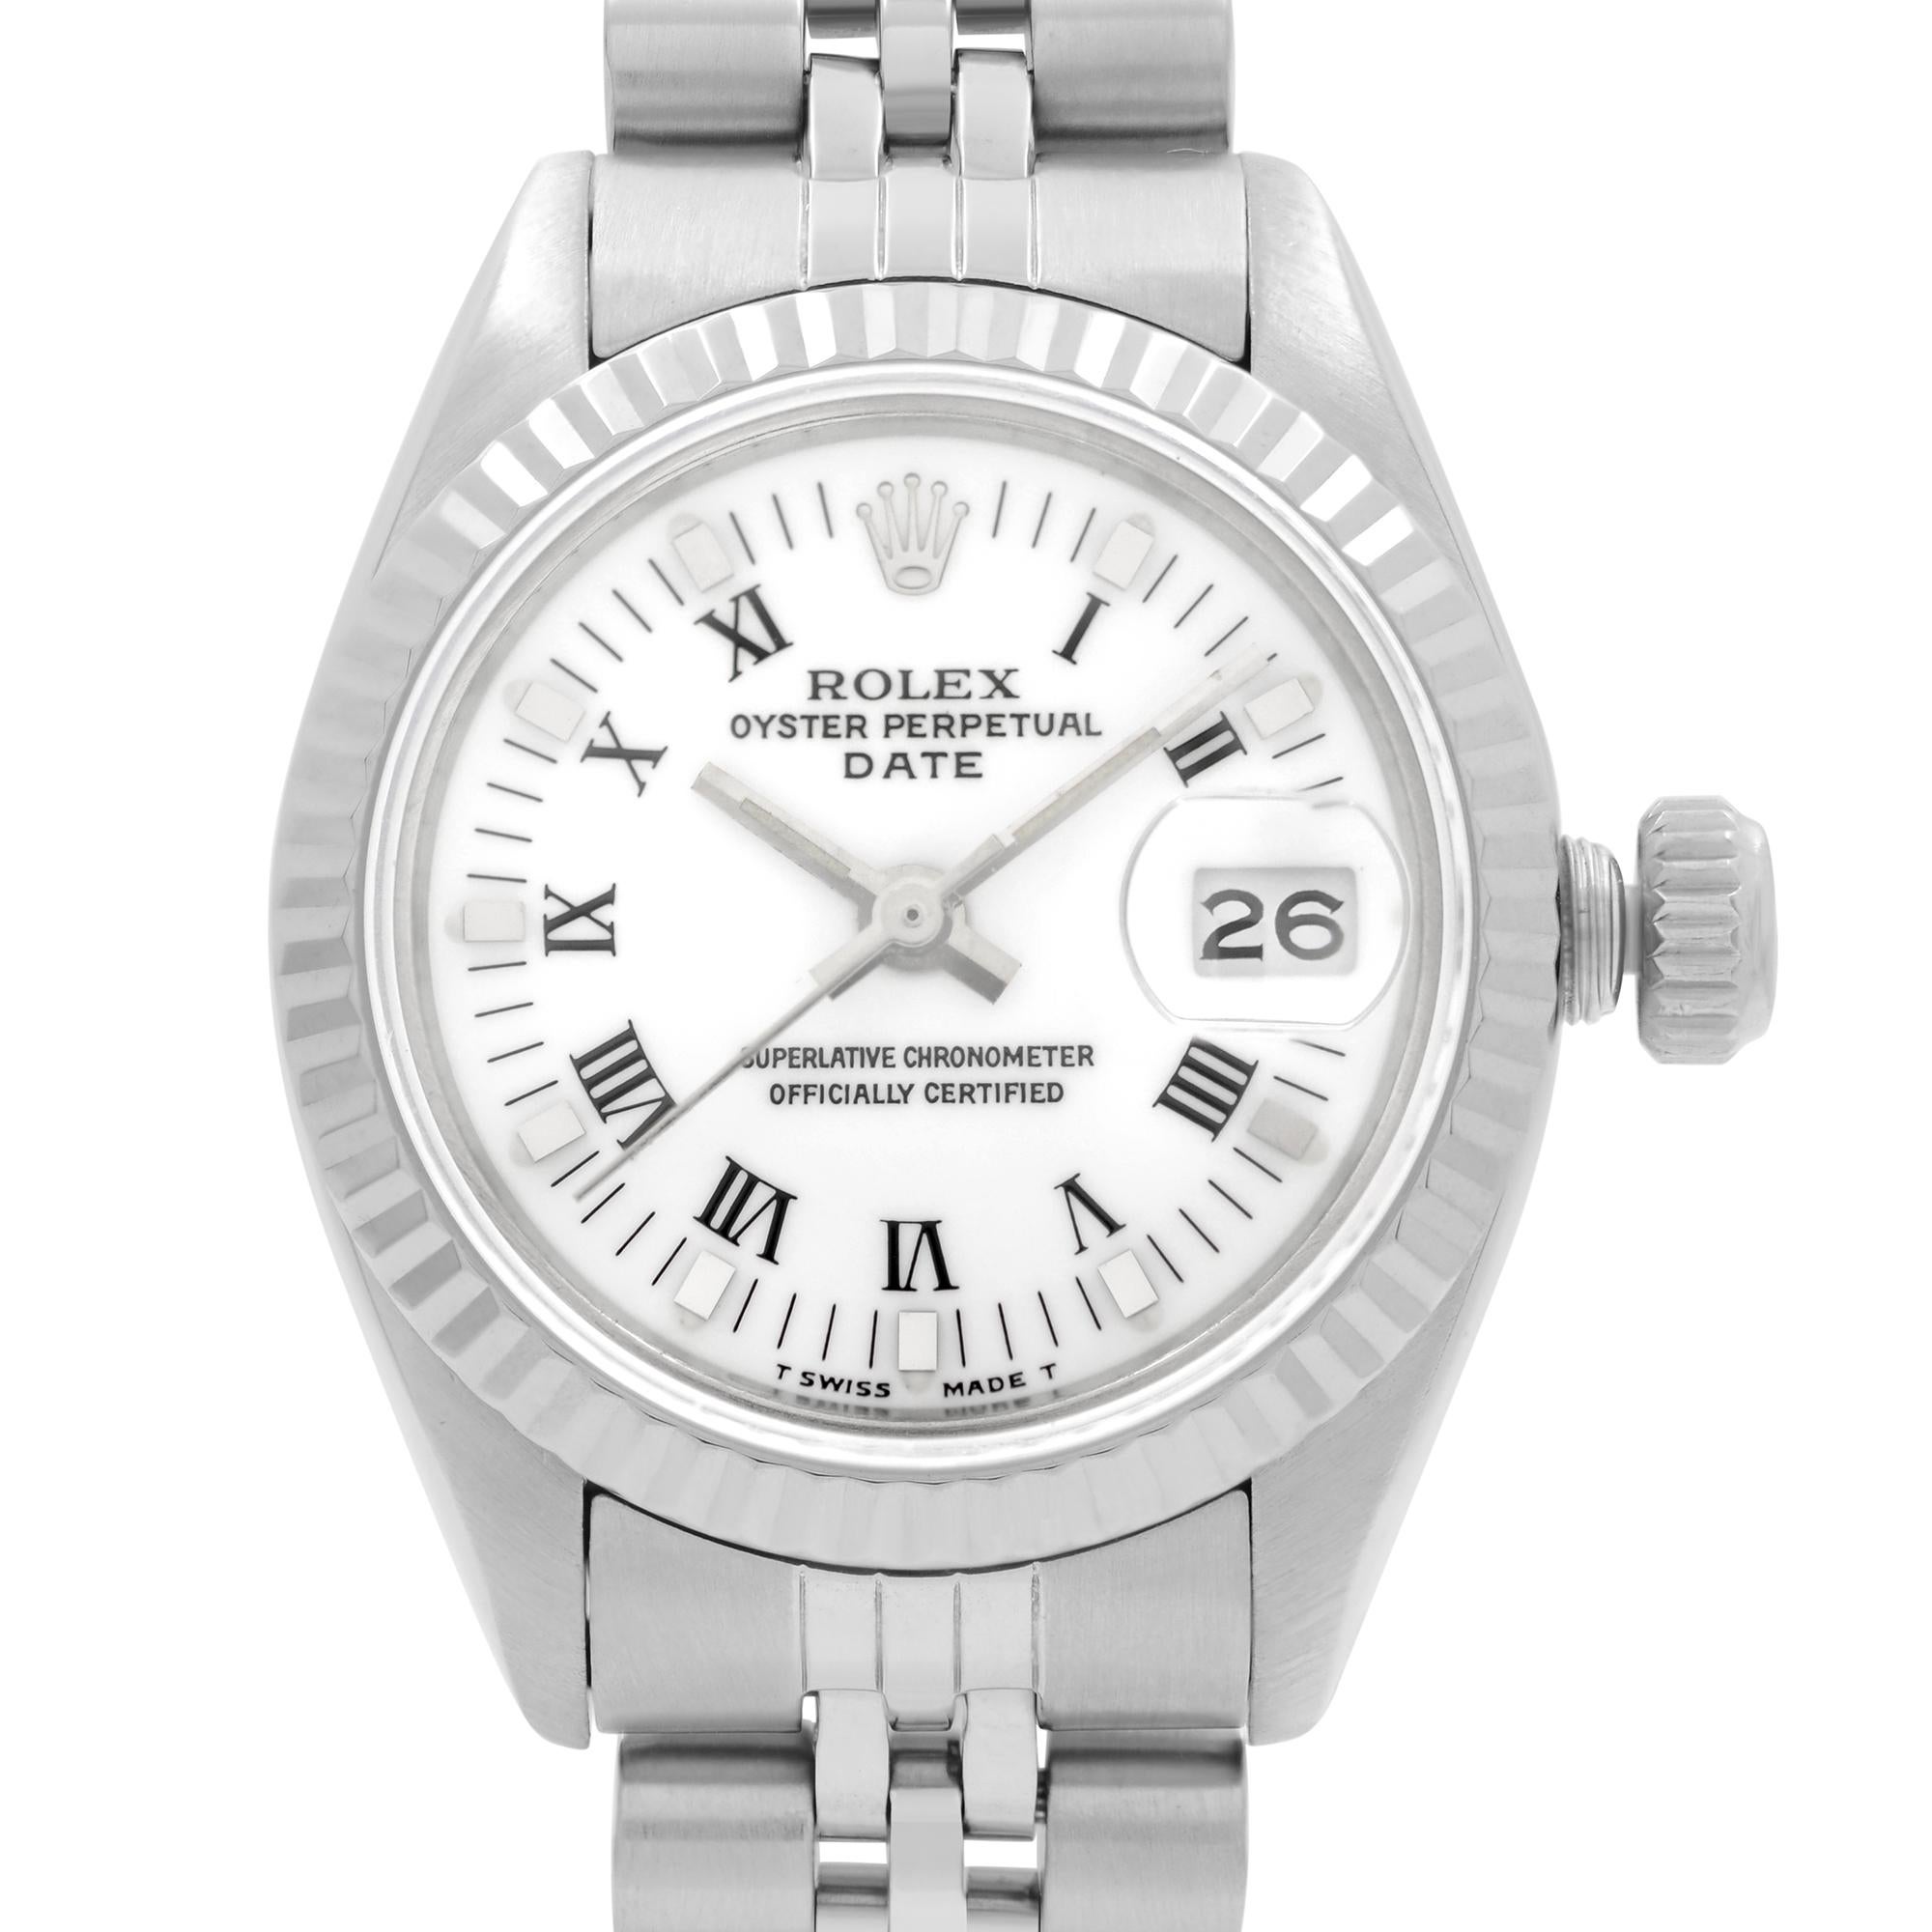 Pre-owned Rolex Datejust 18k White Gold Steel White Dial Automatic Ladies Watch. This watch was produced in 1982. The bracelet of this watch has an obvious slack and some links missing, fits 5.75 inches wrist. Manufacturers box and papers are not